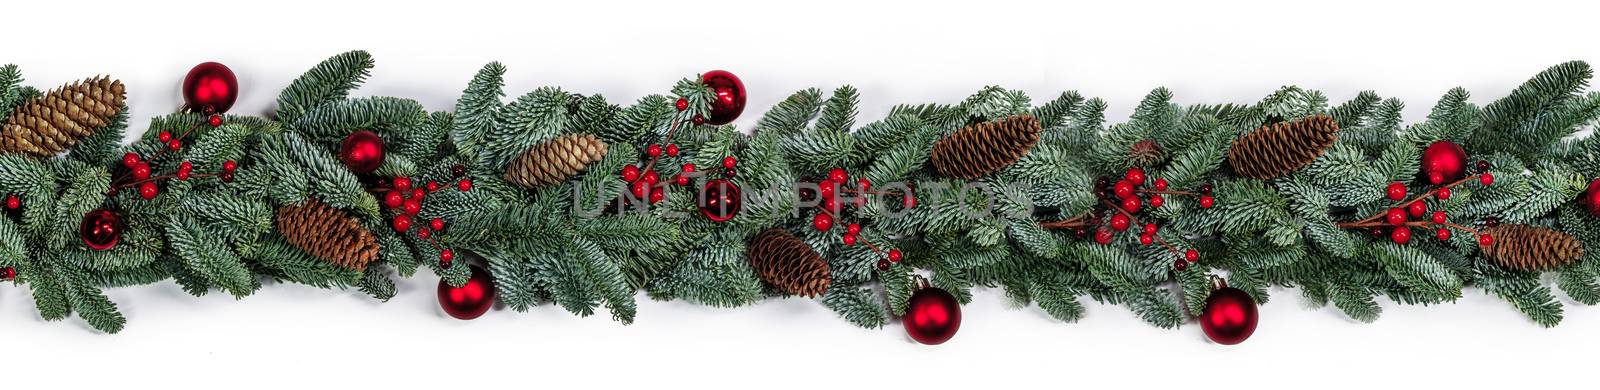 Christmas border frame stripe design copmosition of noble fir tree branch and red decorations balls baubles berries cones isolated on white background